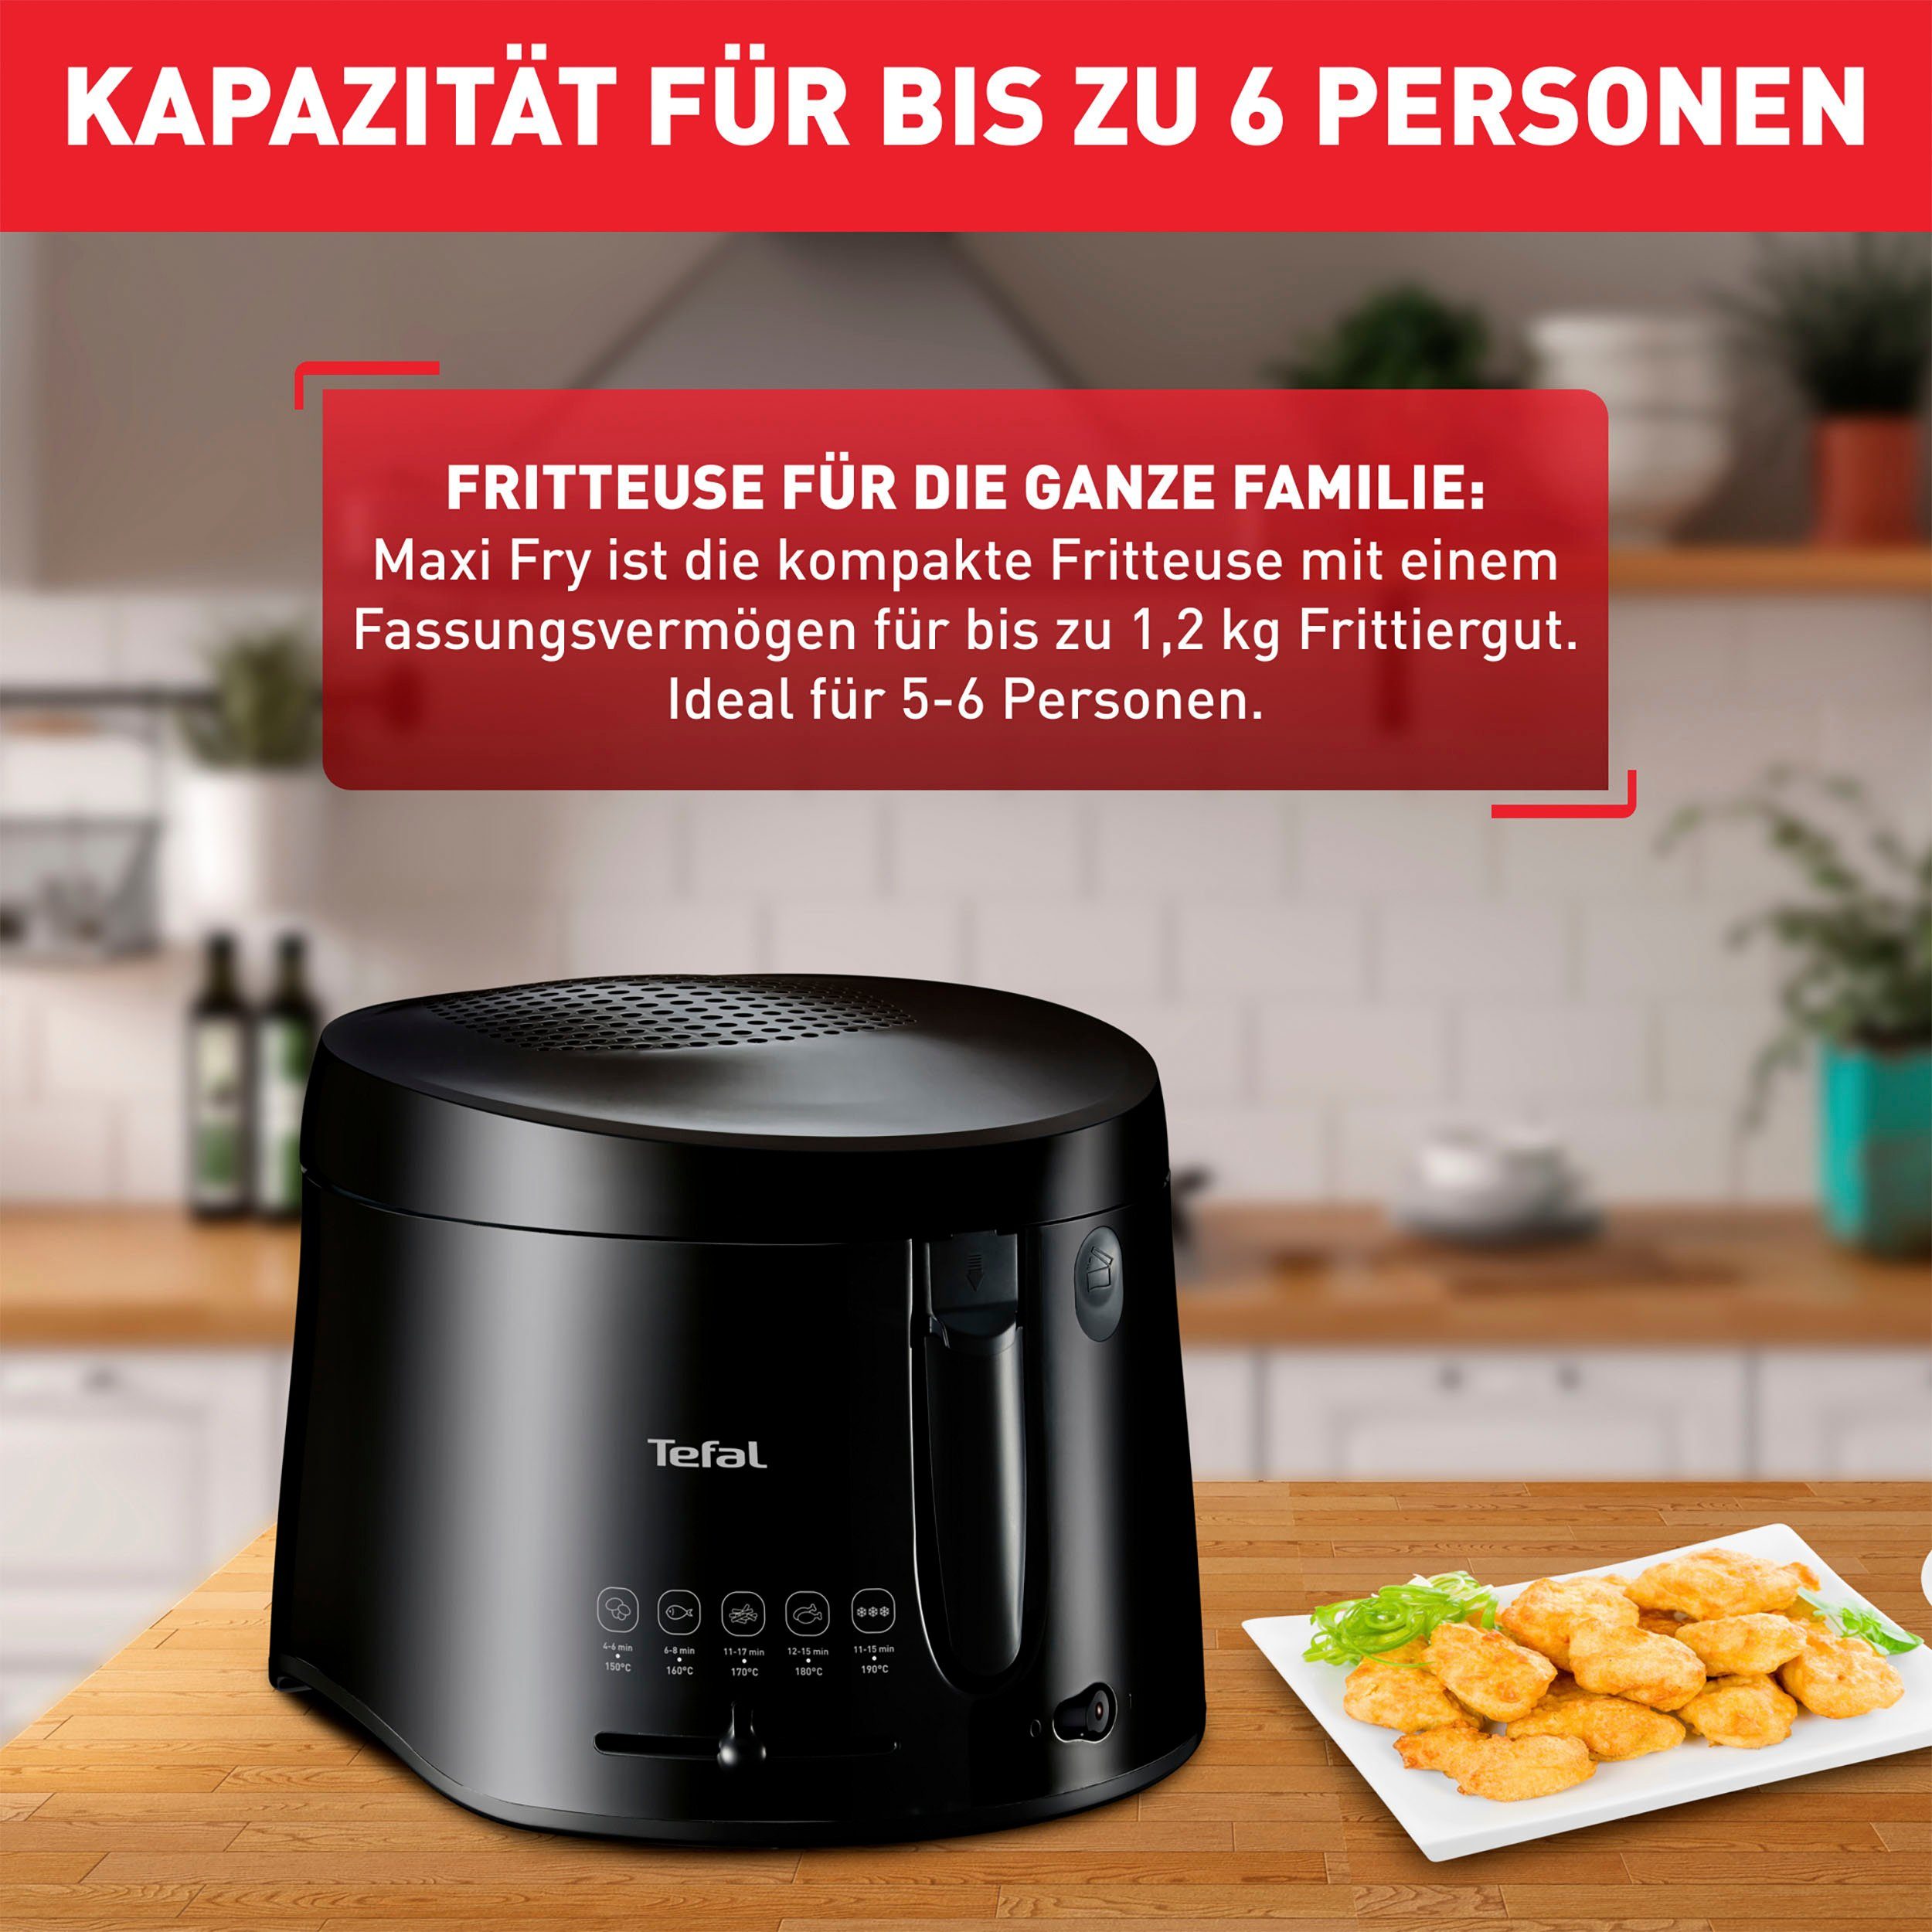 Tefal Fritteuse FF1078 Maxi Fry, 1900 W, Cool Wall Technologie,  Familienkapazität